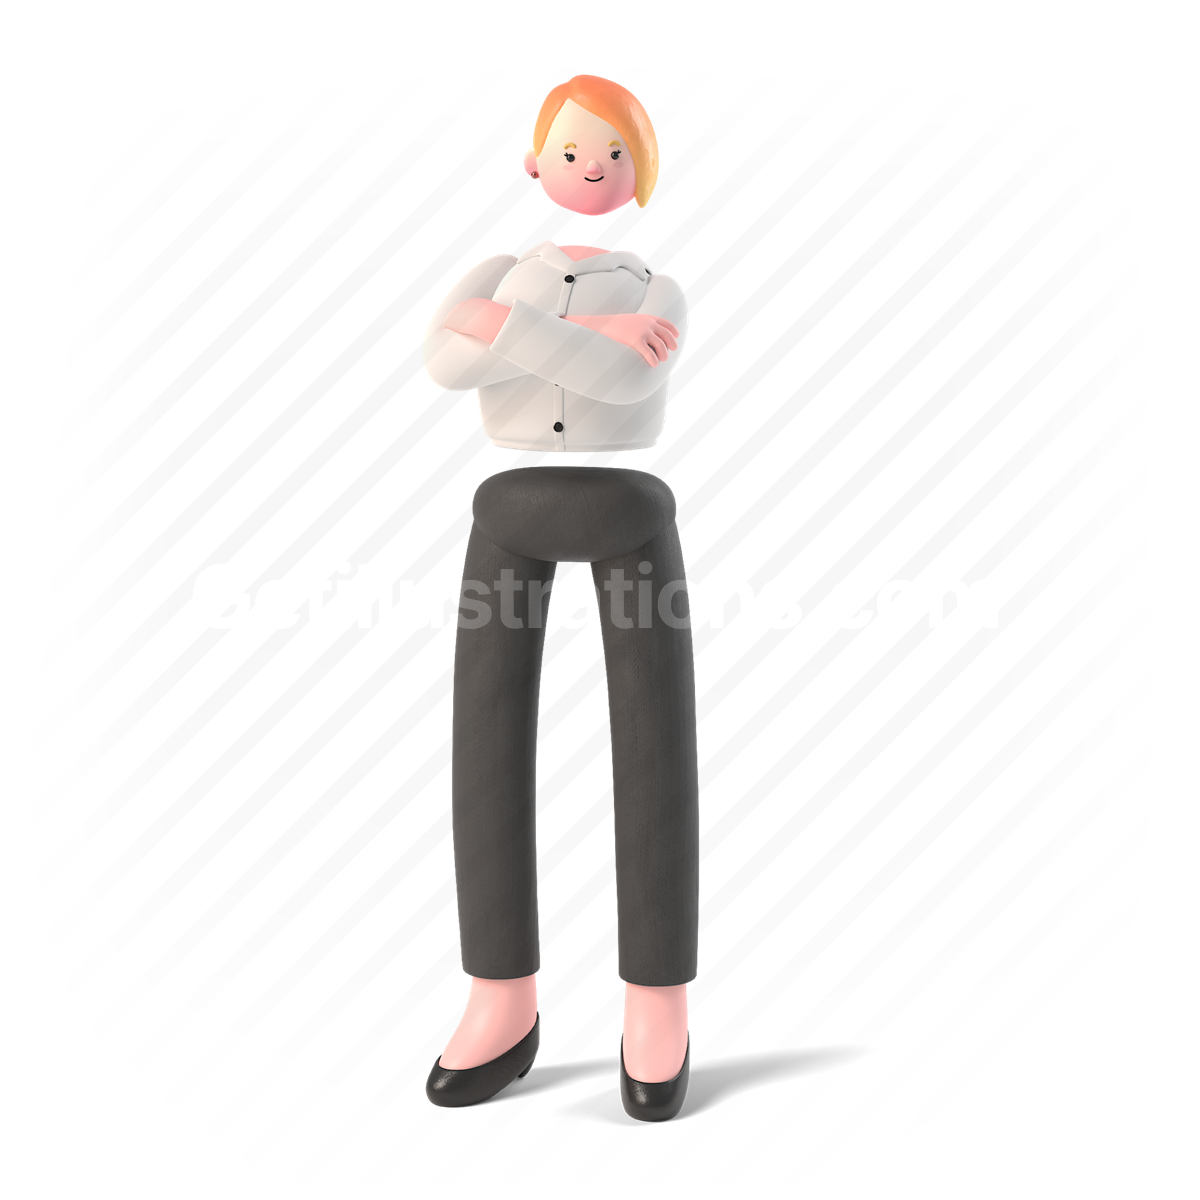 3d, people, person, woman, arms crossed, work, uniform, suit